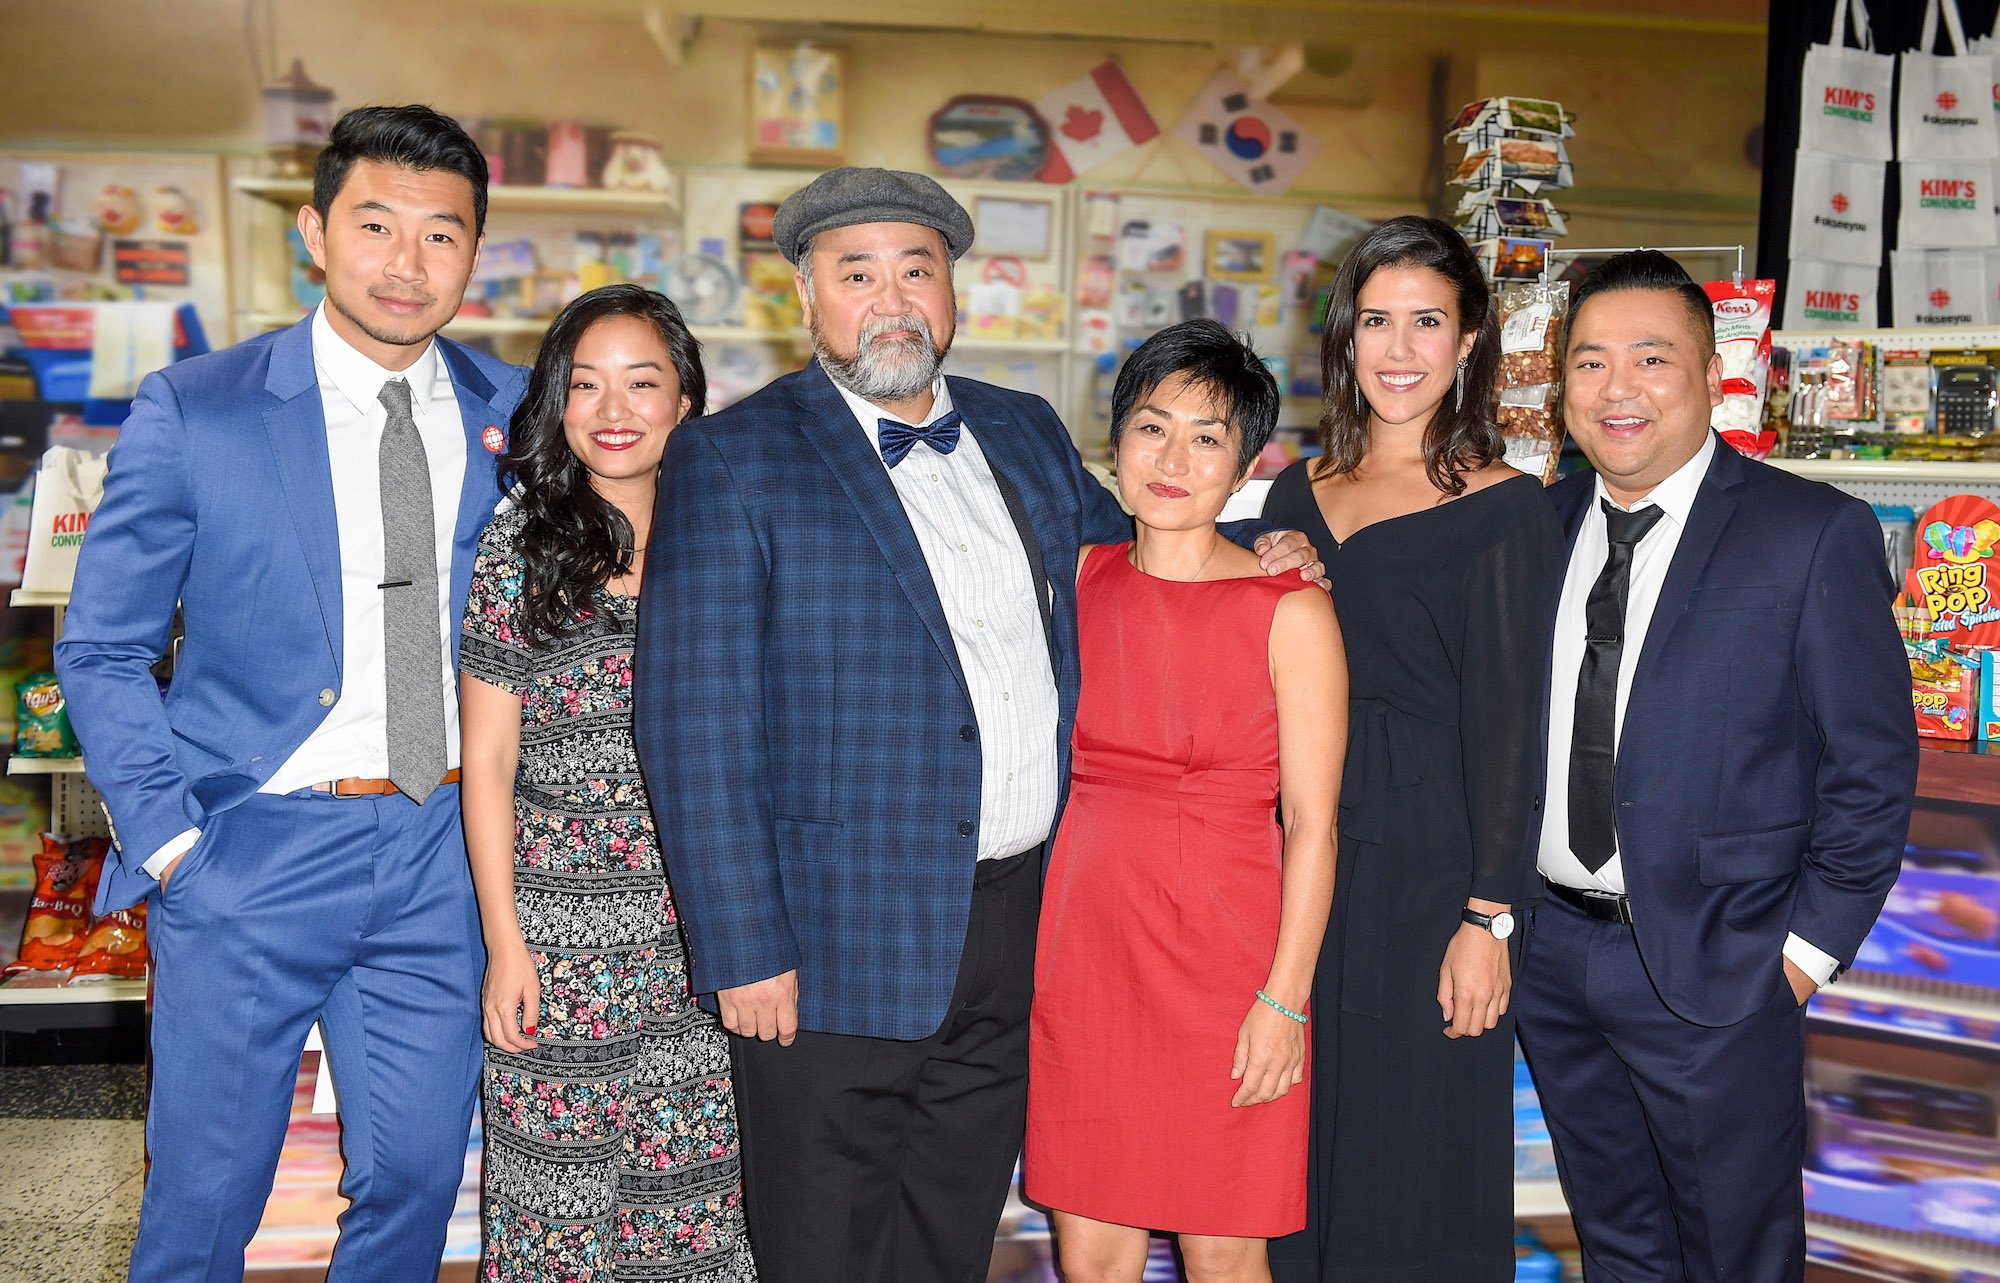 Cast of 'Kim's Convenience' smiling in front of a convenience store backdrop